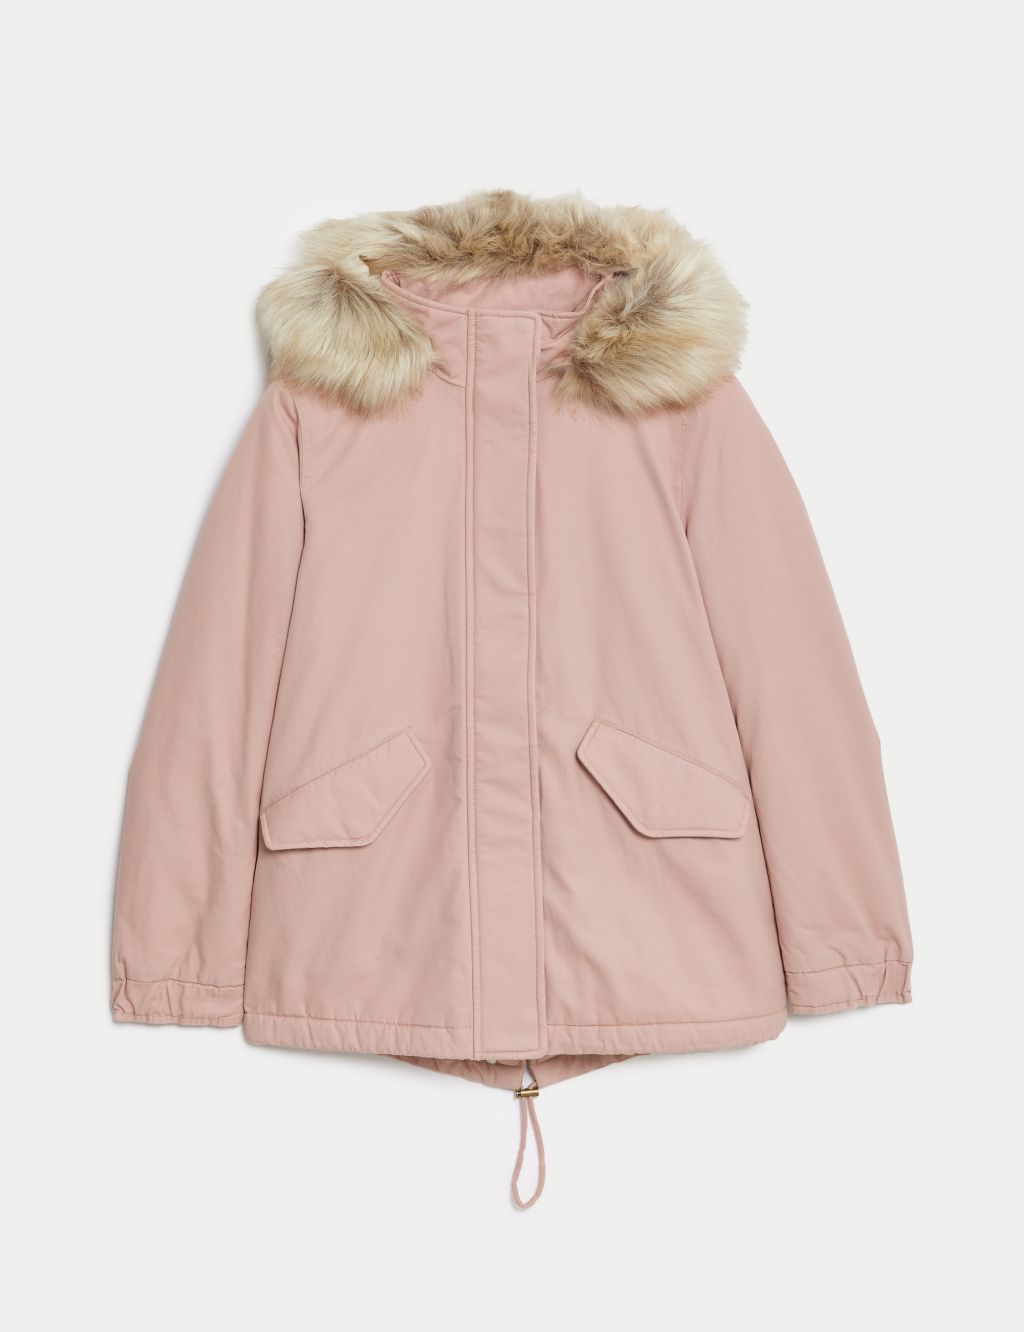 Cotton Rich Hooded Borg Lined Parka Coat image 2